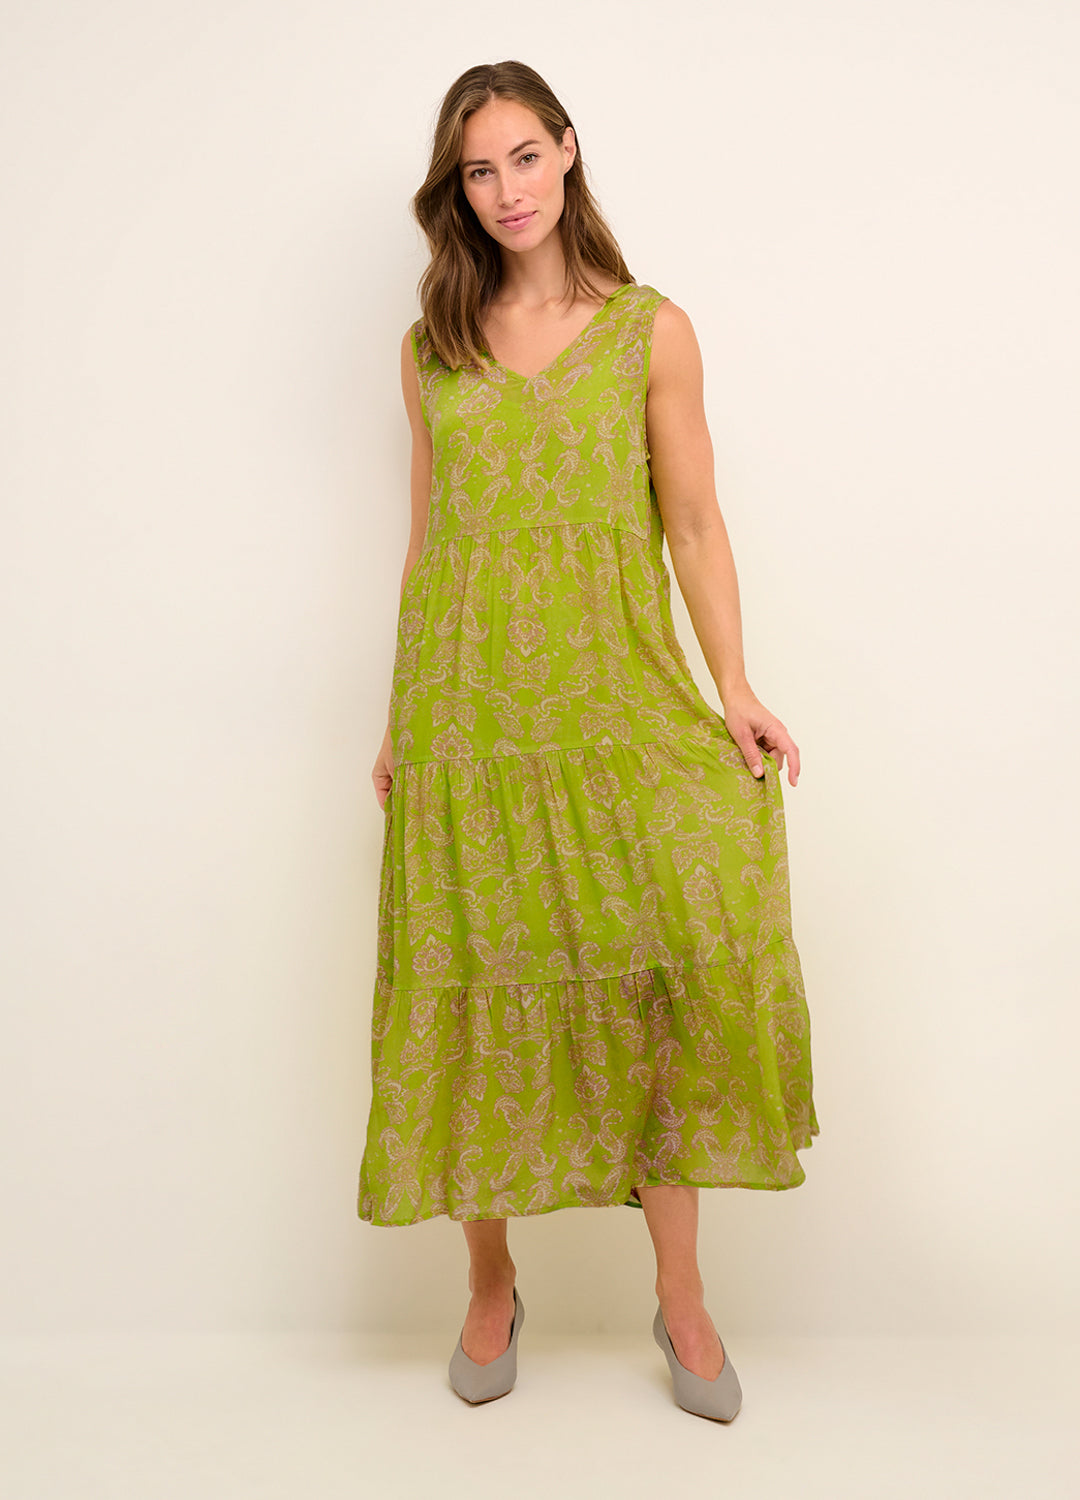 Cream Clothing Param Long Dress in Wild Lime tapestry print at Inner Beach Co, Toronto, Ontario, Canada